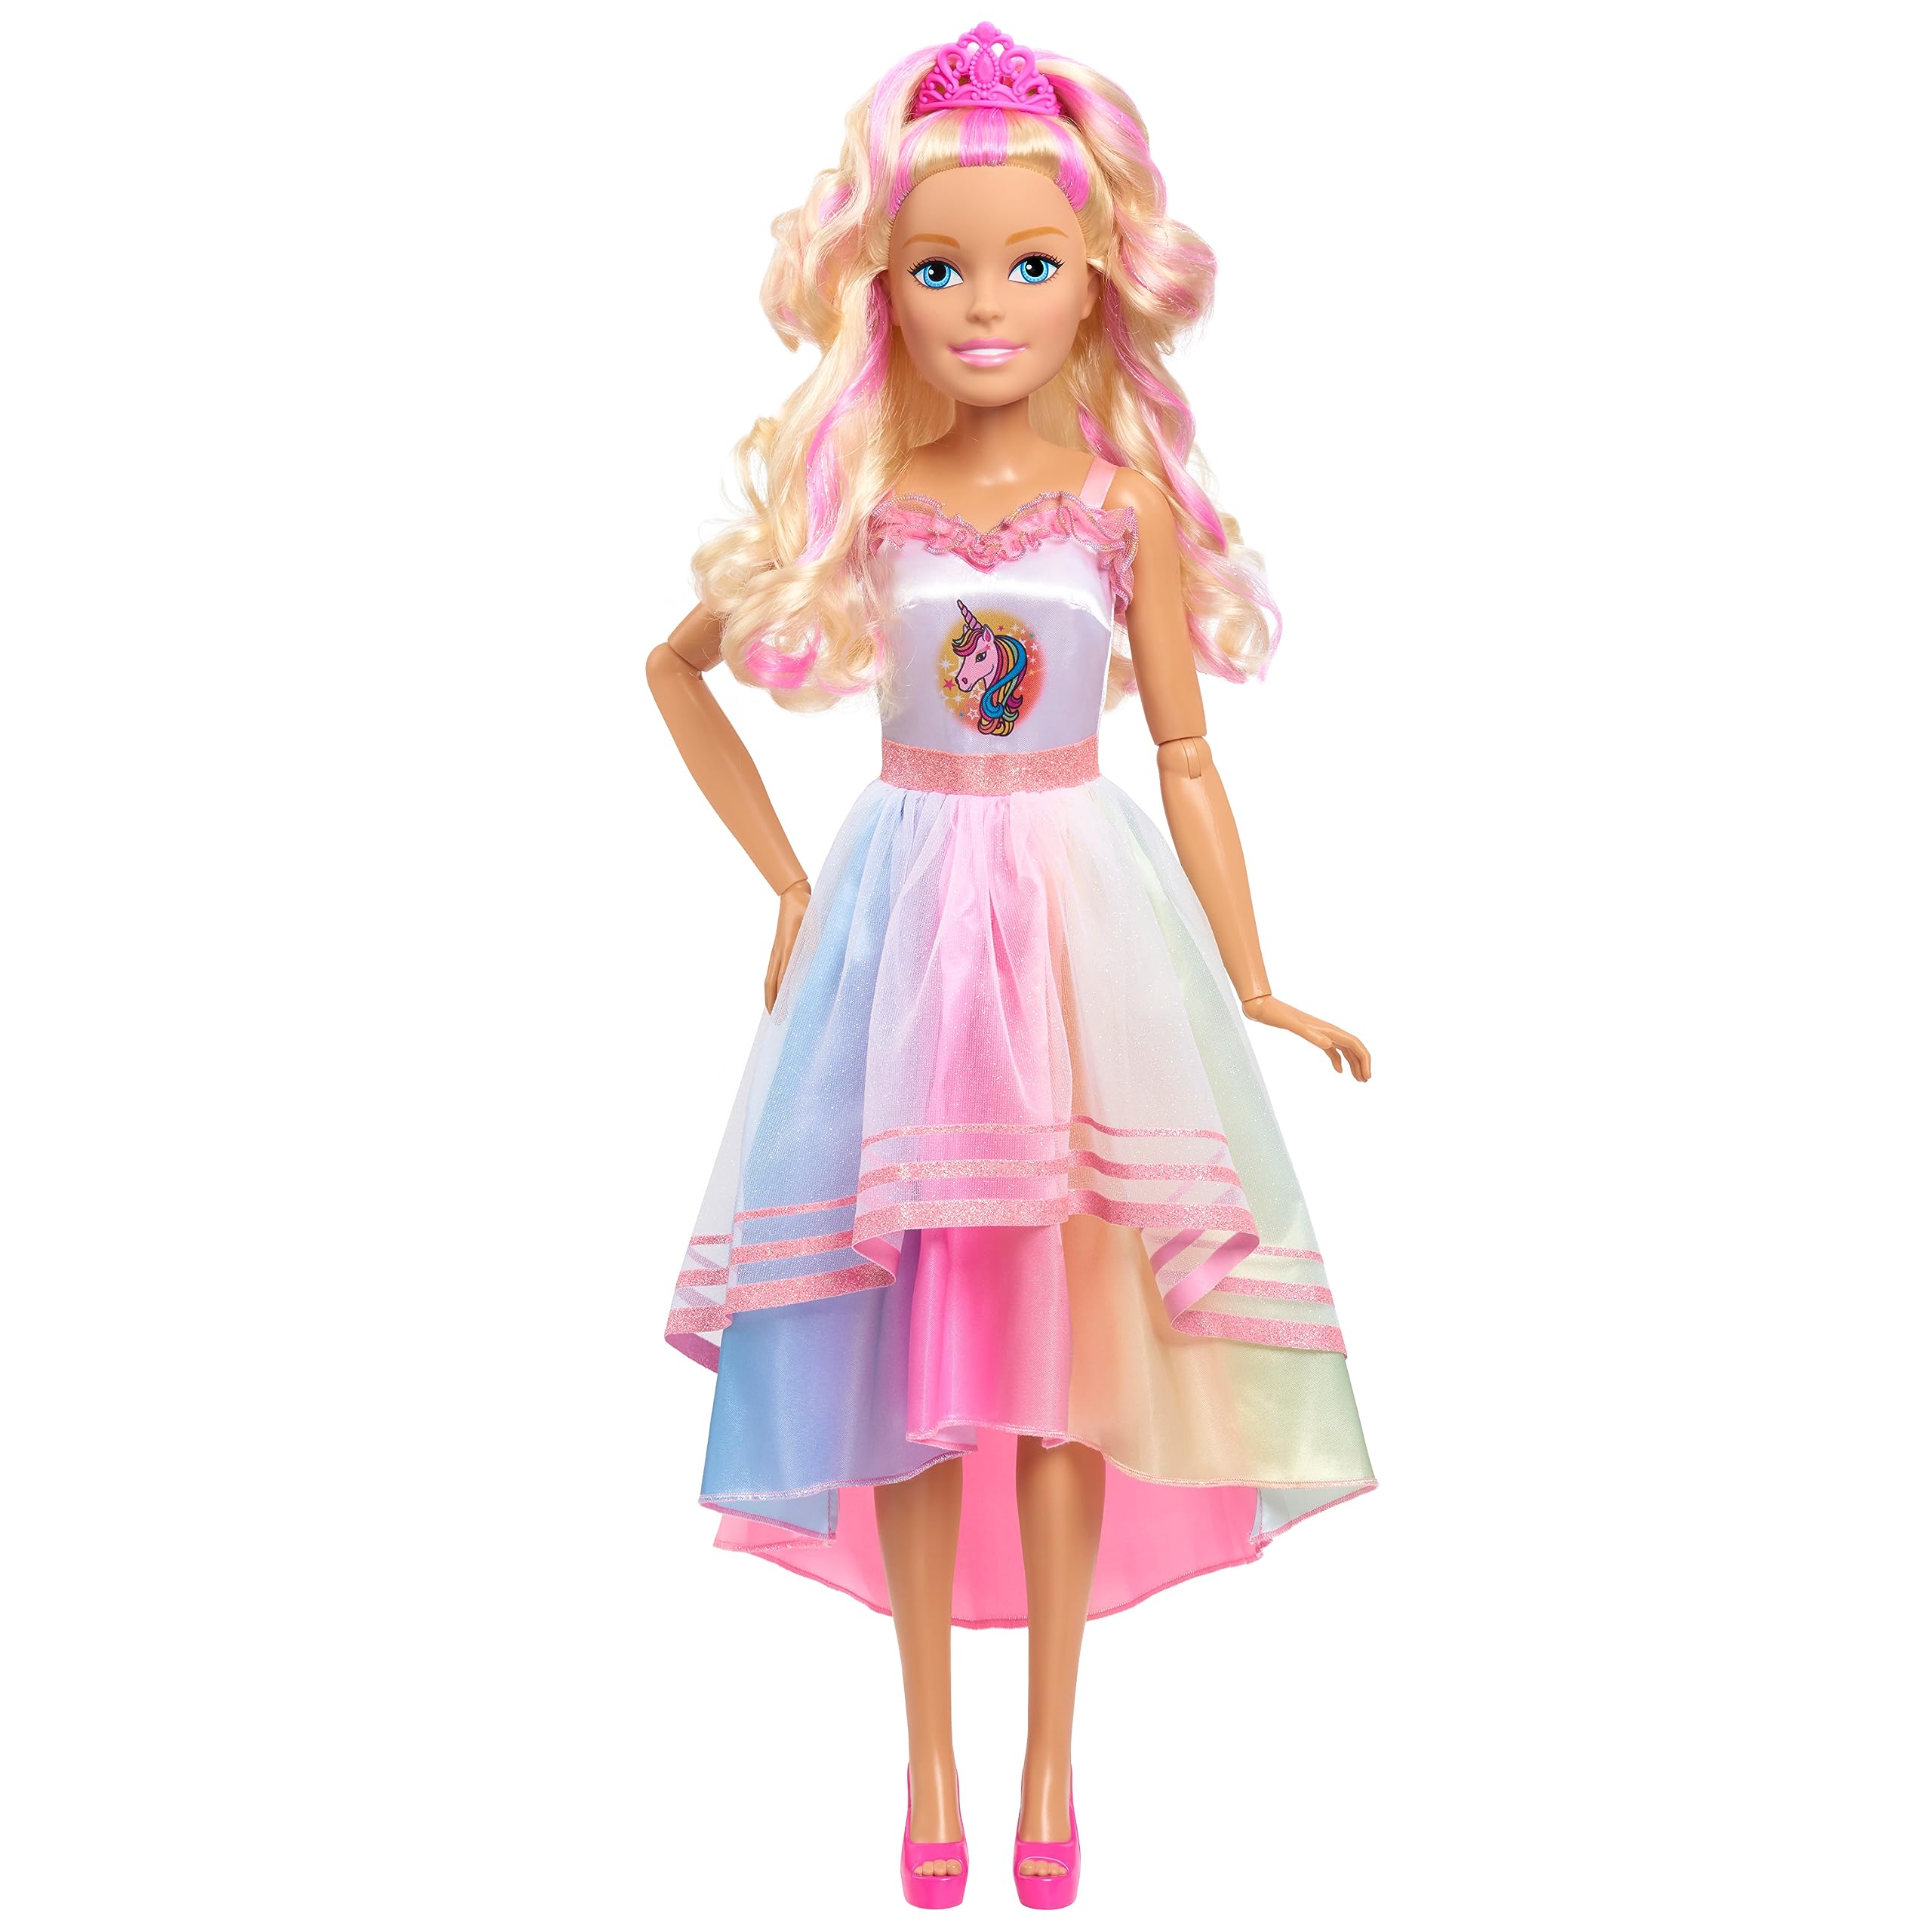 Just Play Barbie 28-inch Best Fashion Friend Unicorn Party Doll, Blonde Hair, Kids Toys for Ages 3 Up, Amazon Exclusive